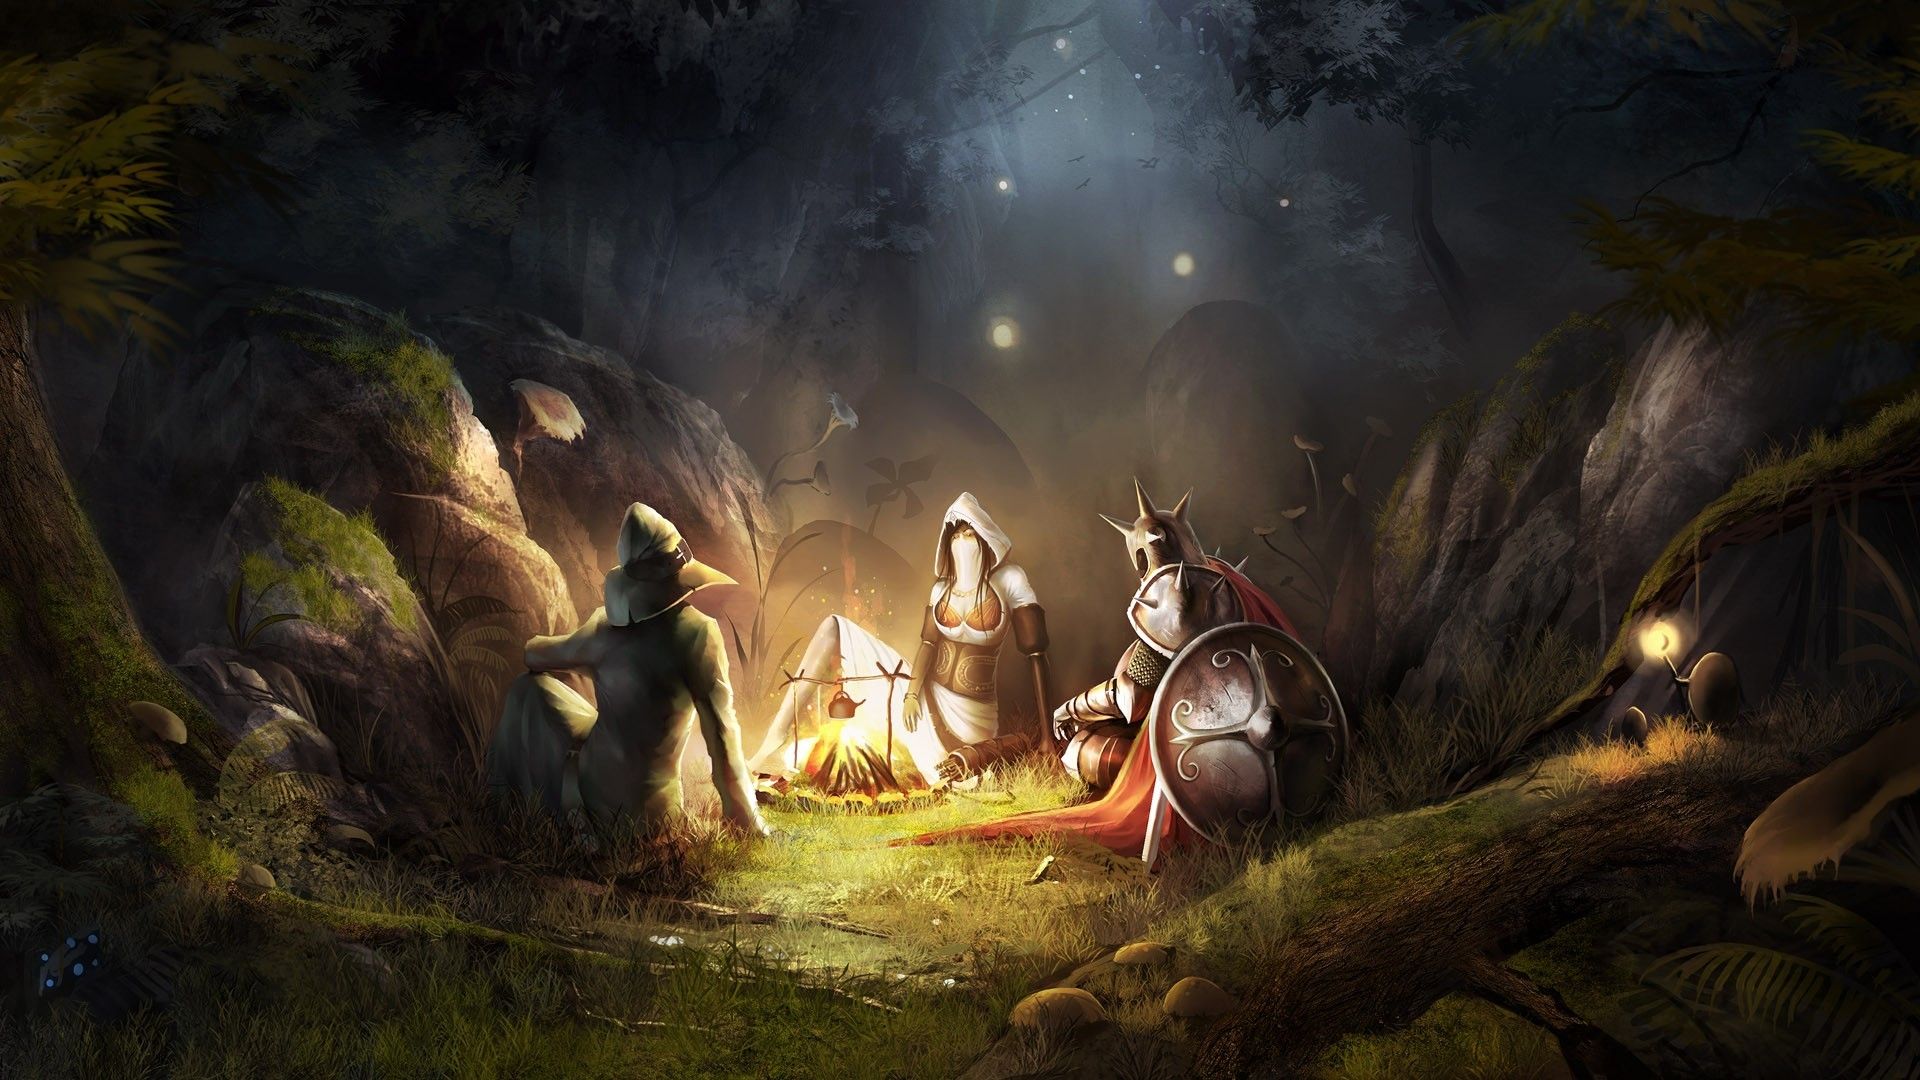 Warriors resting in the forest - Trine 2 Wallpaper 24886